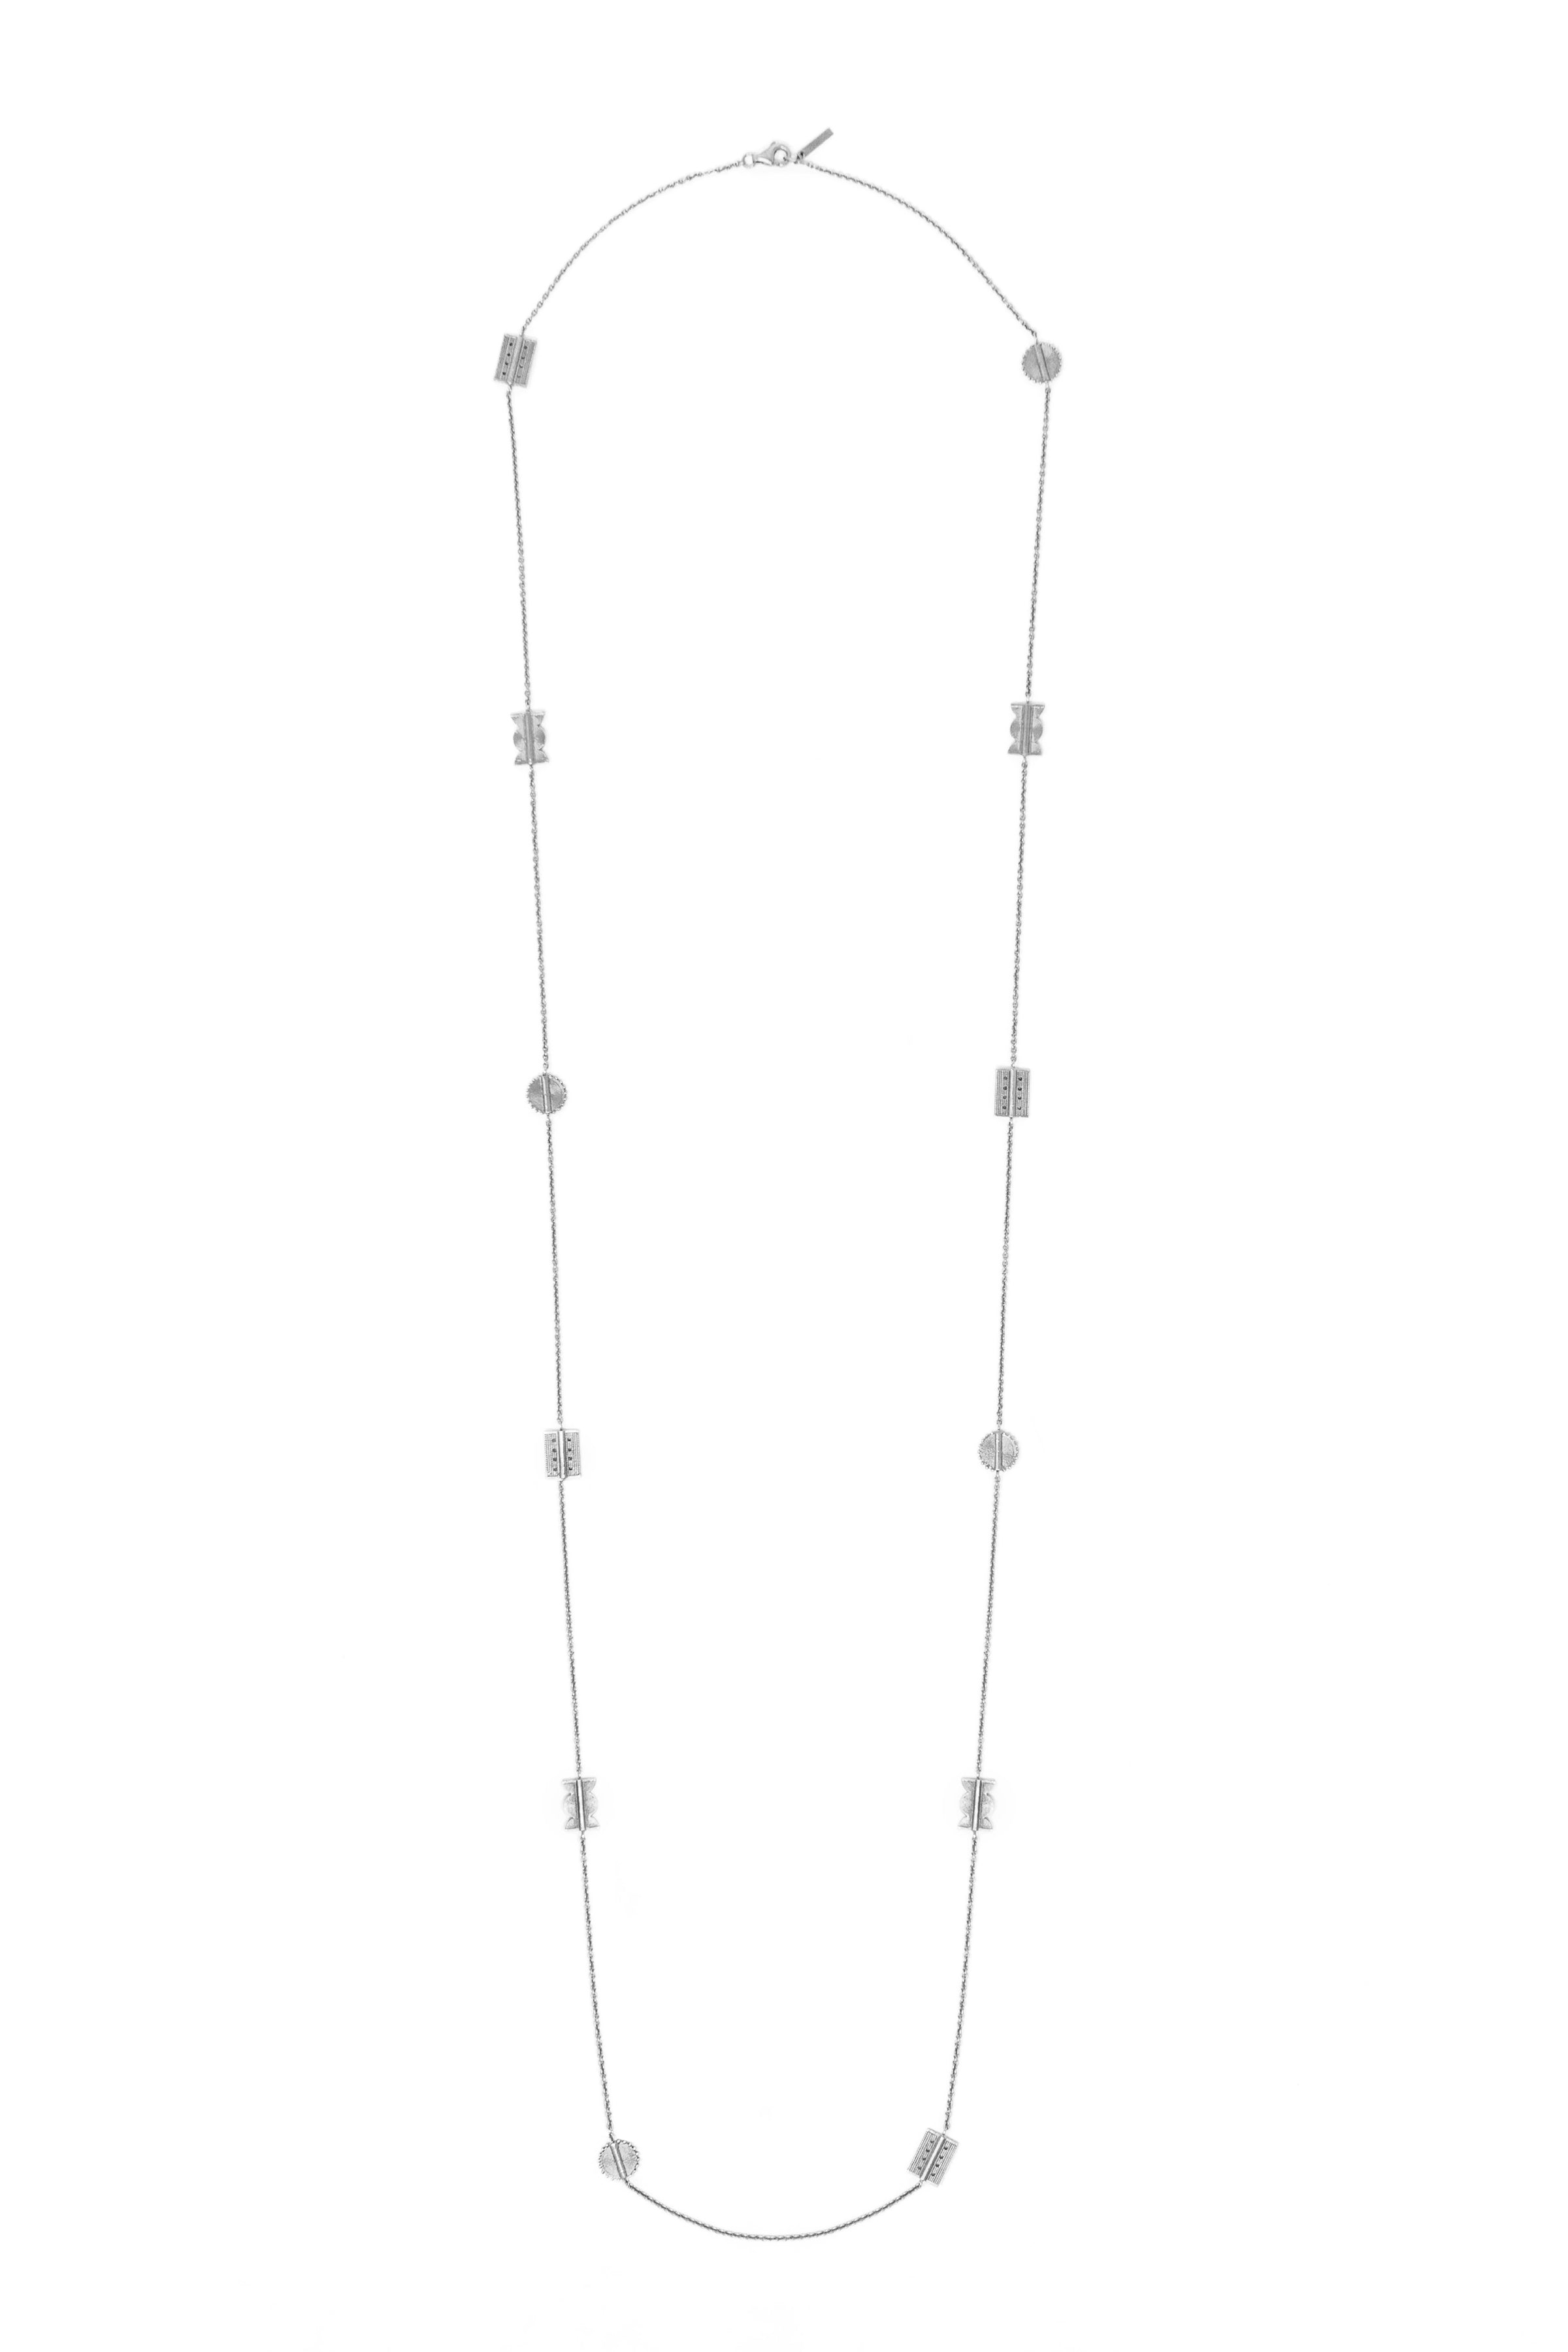 THE BAULE Staccato Necklace